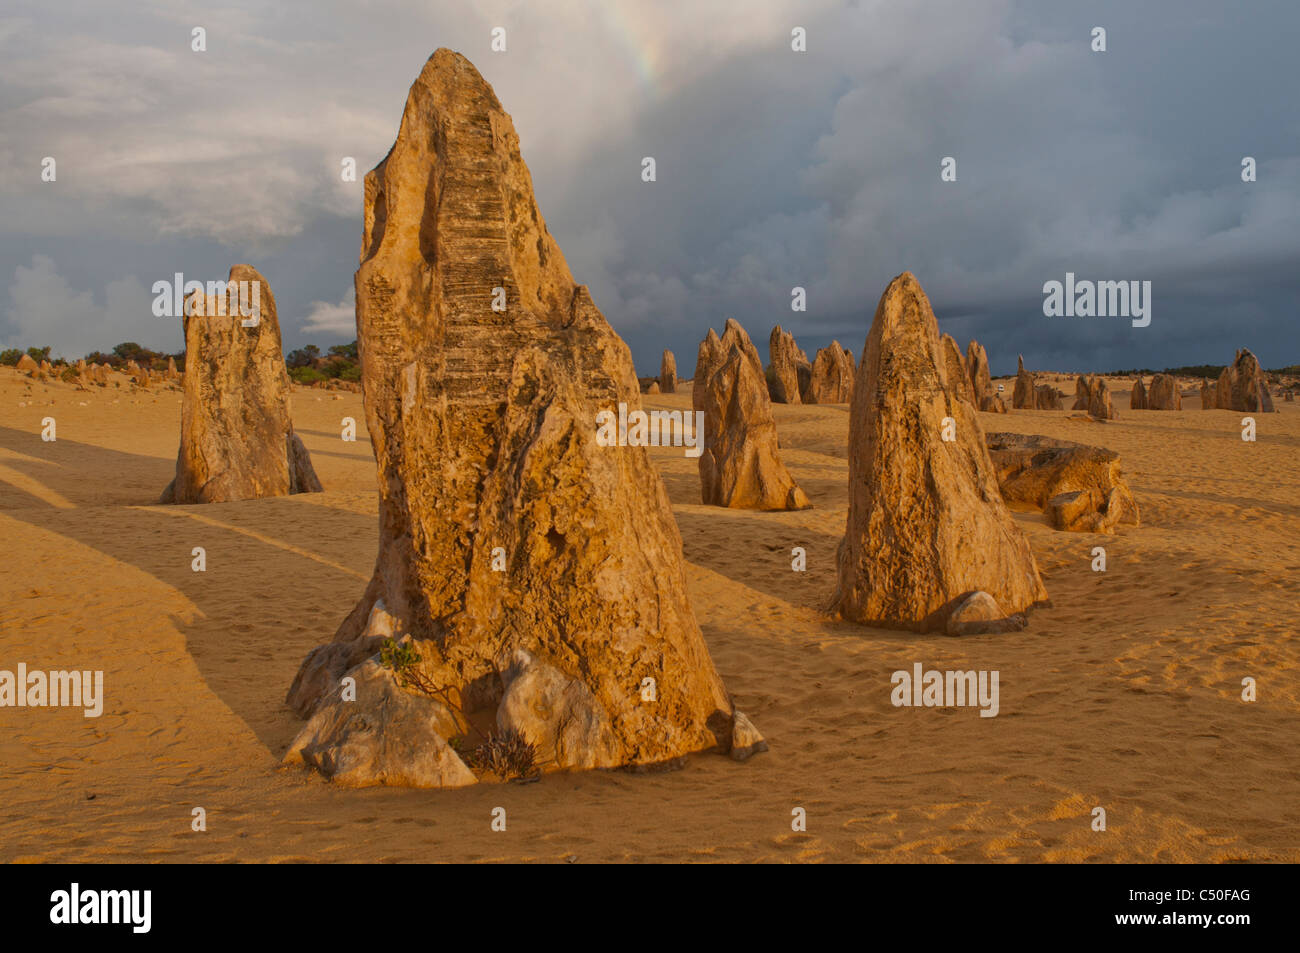 Rock formations in the Pinnacles Desert, Western Australia Stock Photo